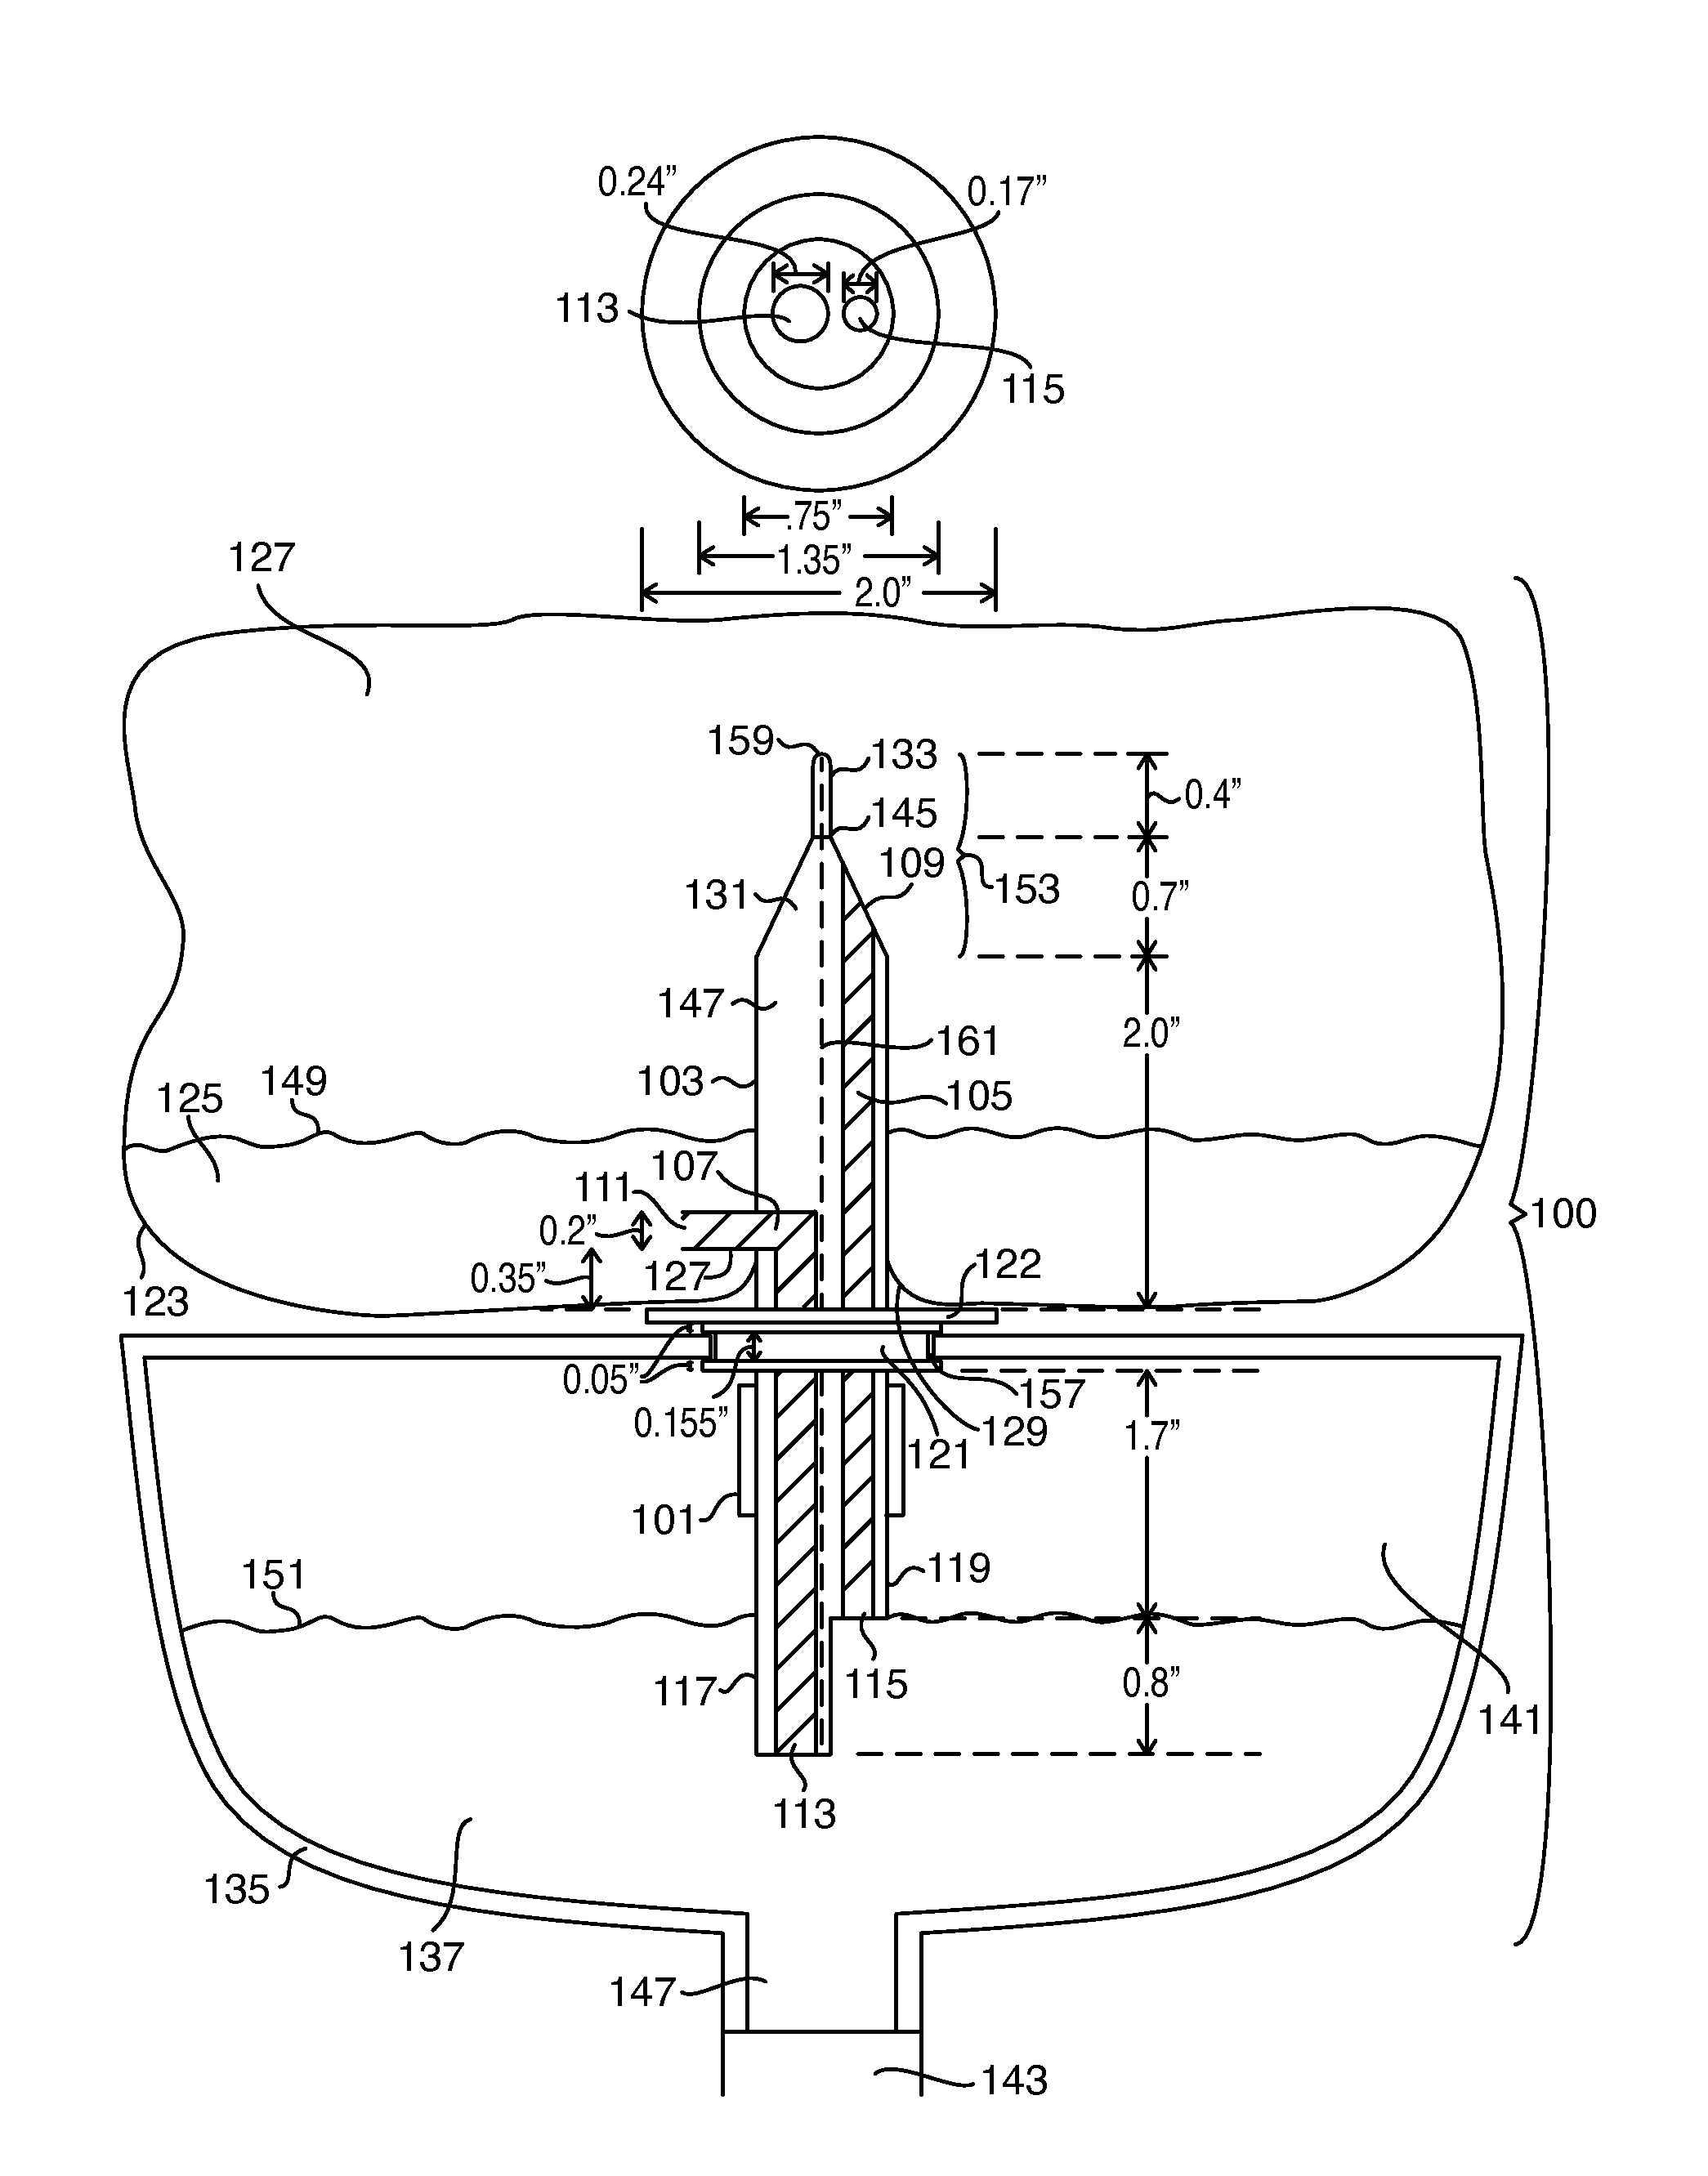 Multiple Channel Single Spike for a Liquid Dispensing System